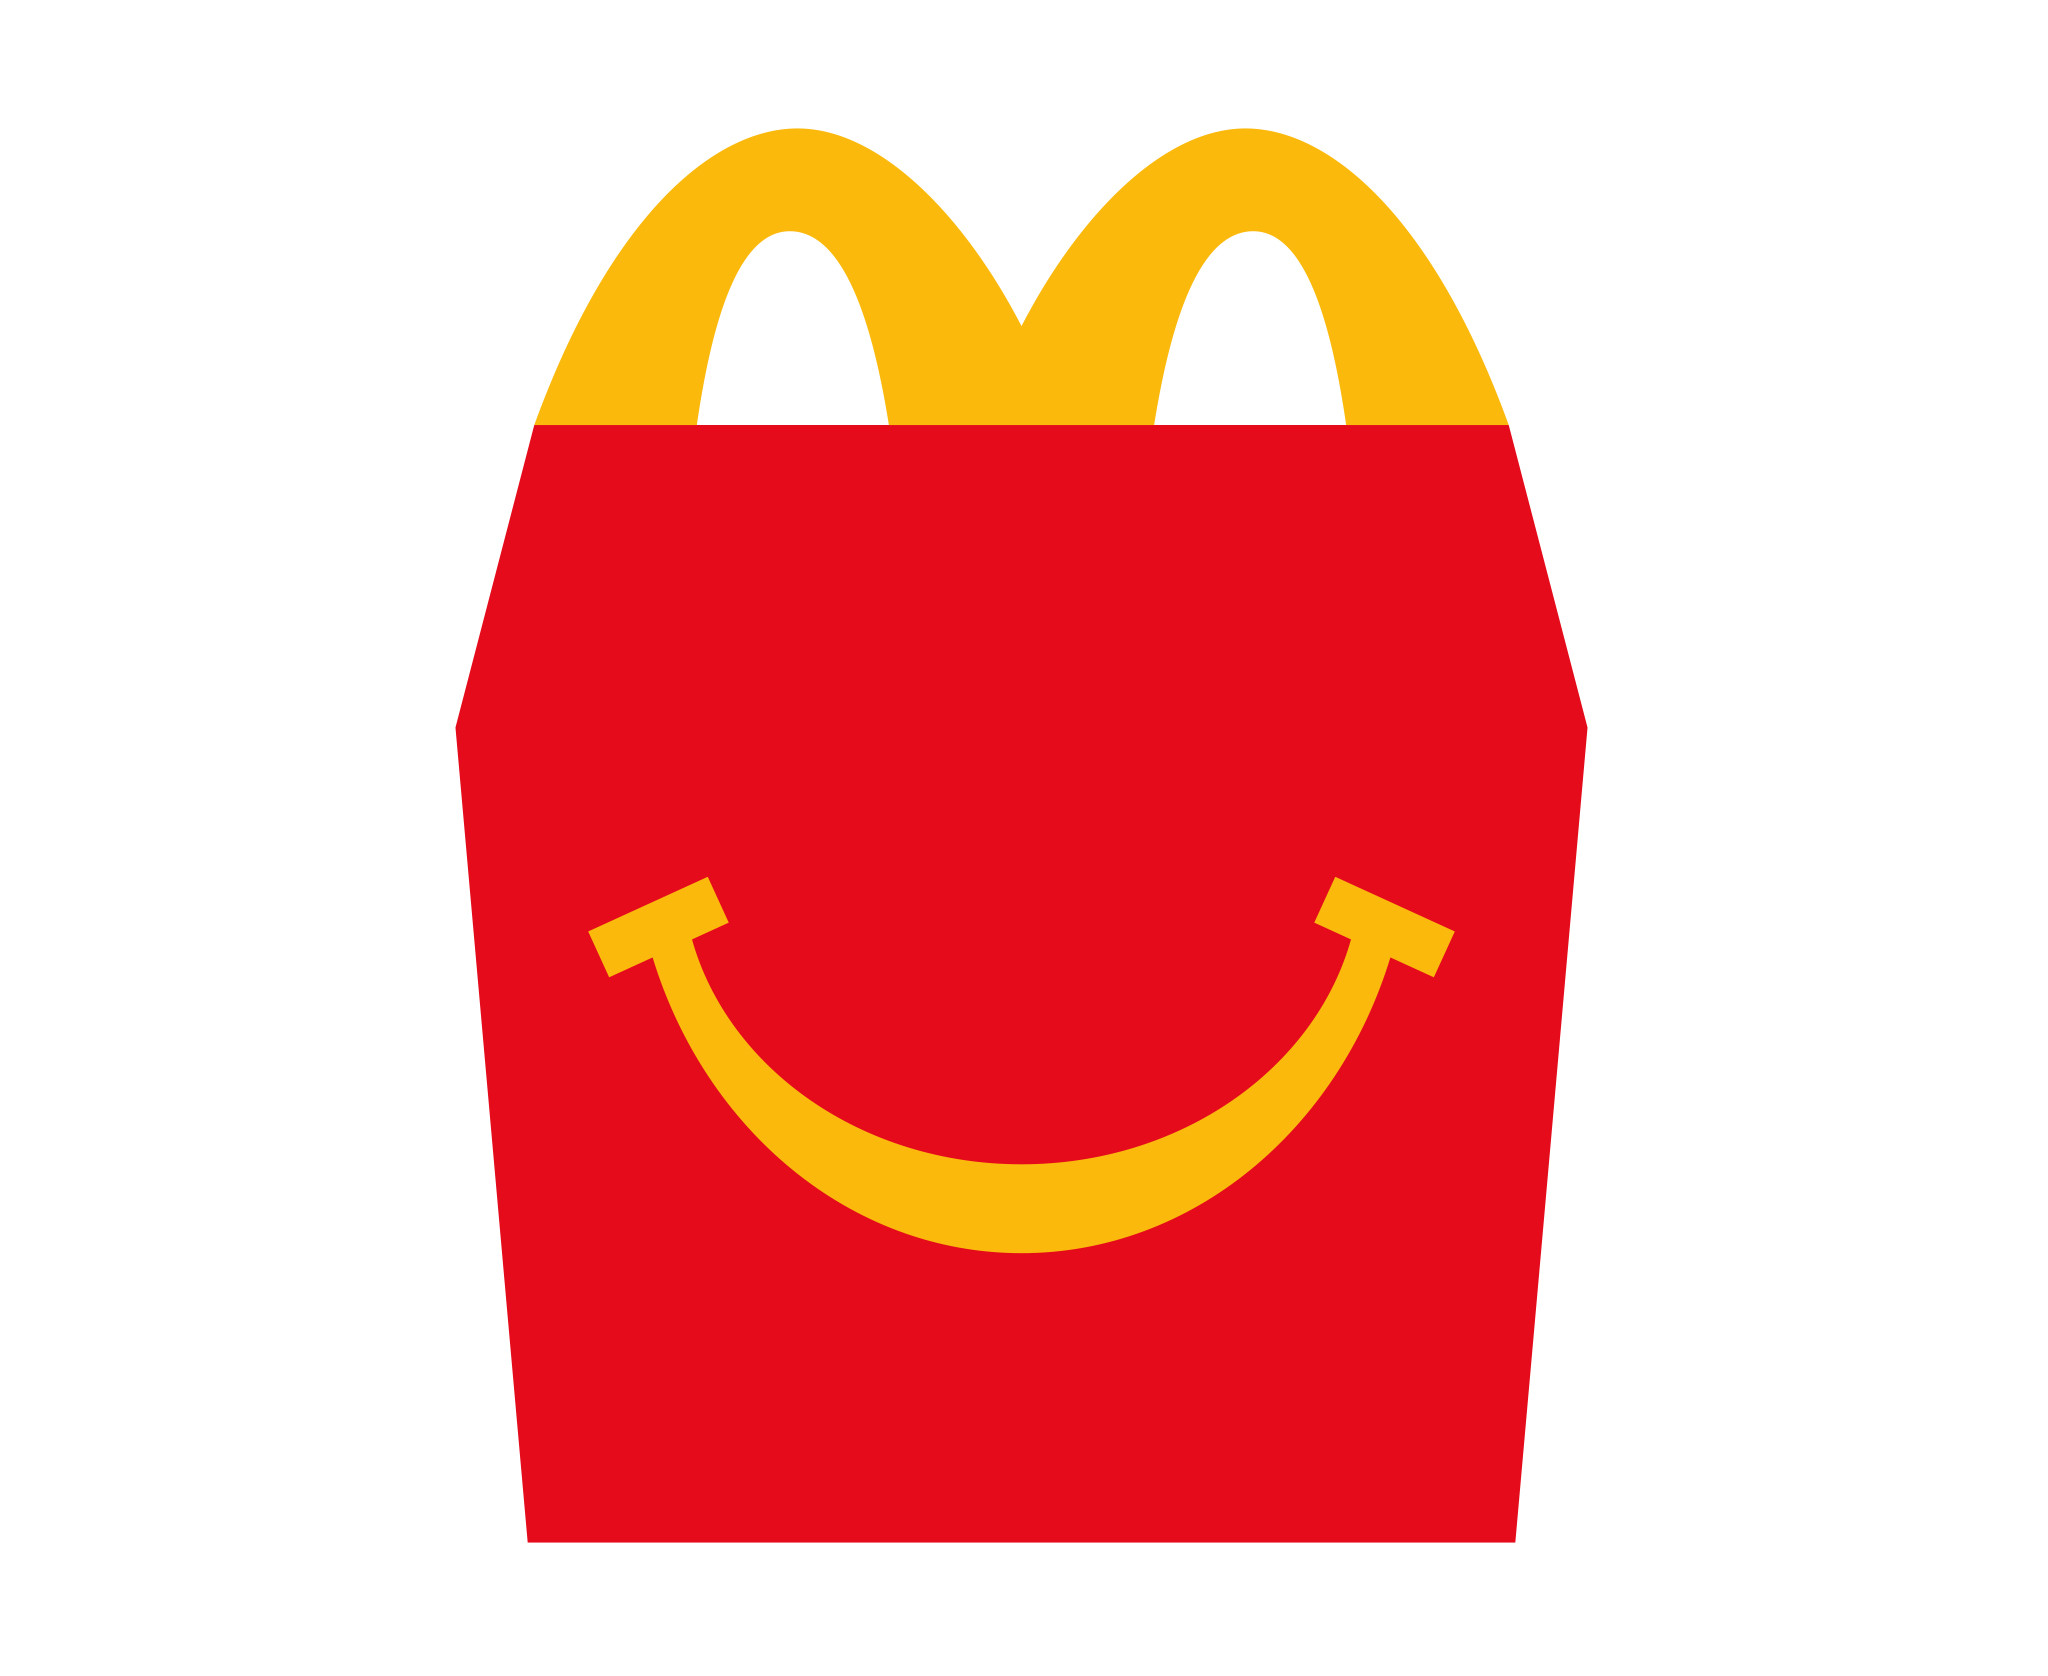 Happy Meal